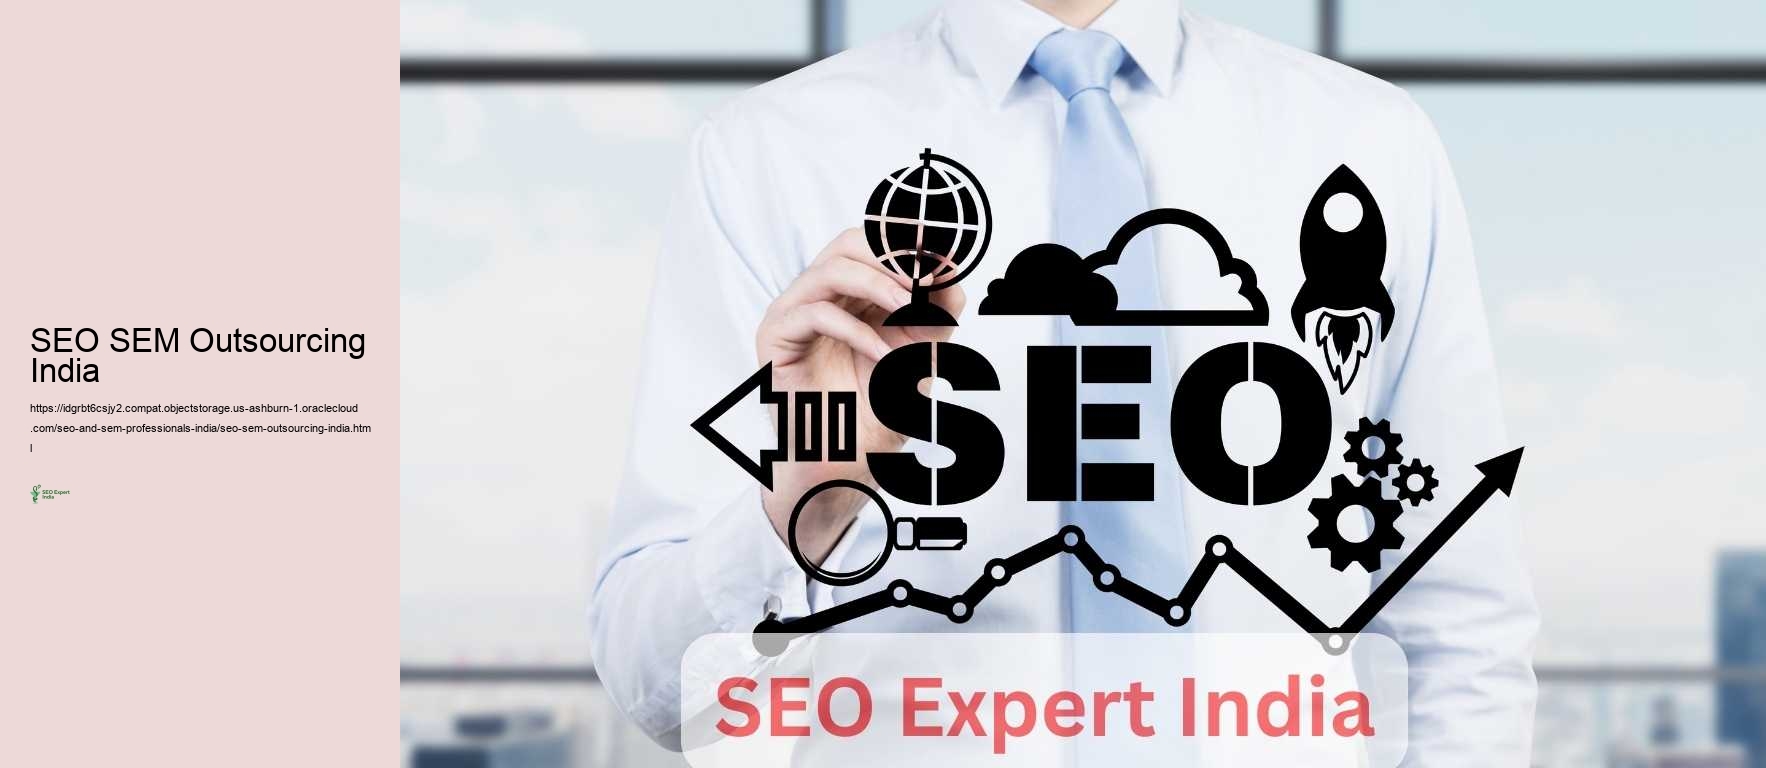 SEO SEM Outsourcing India